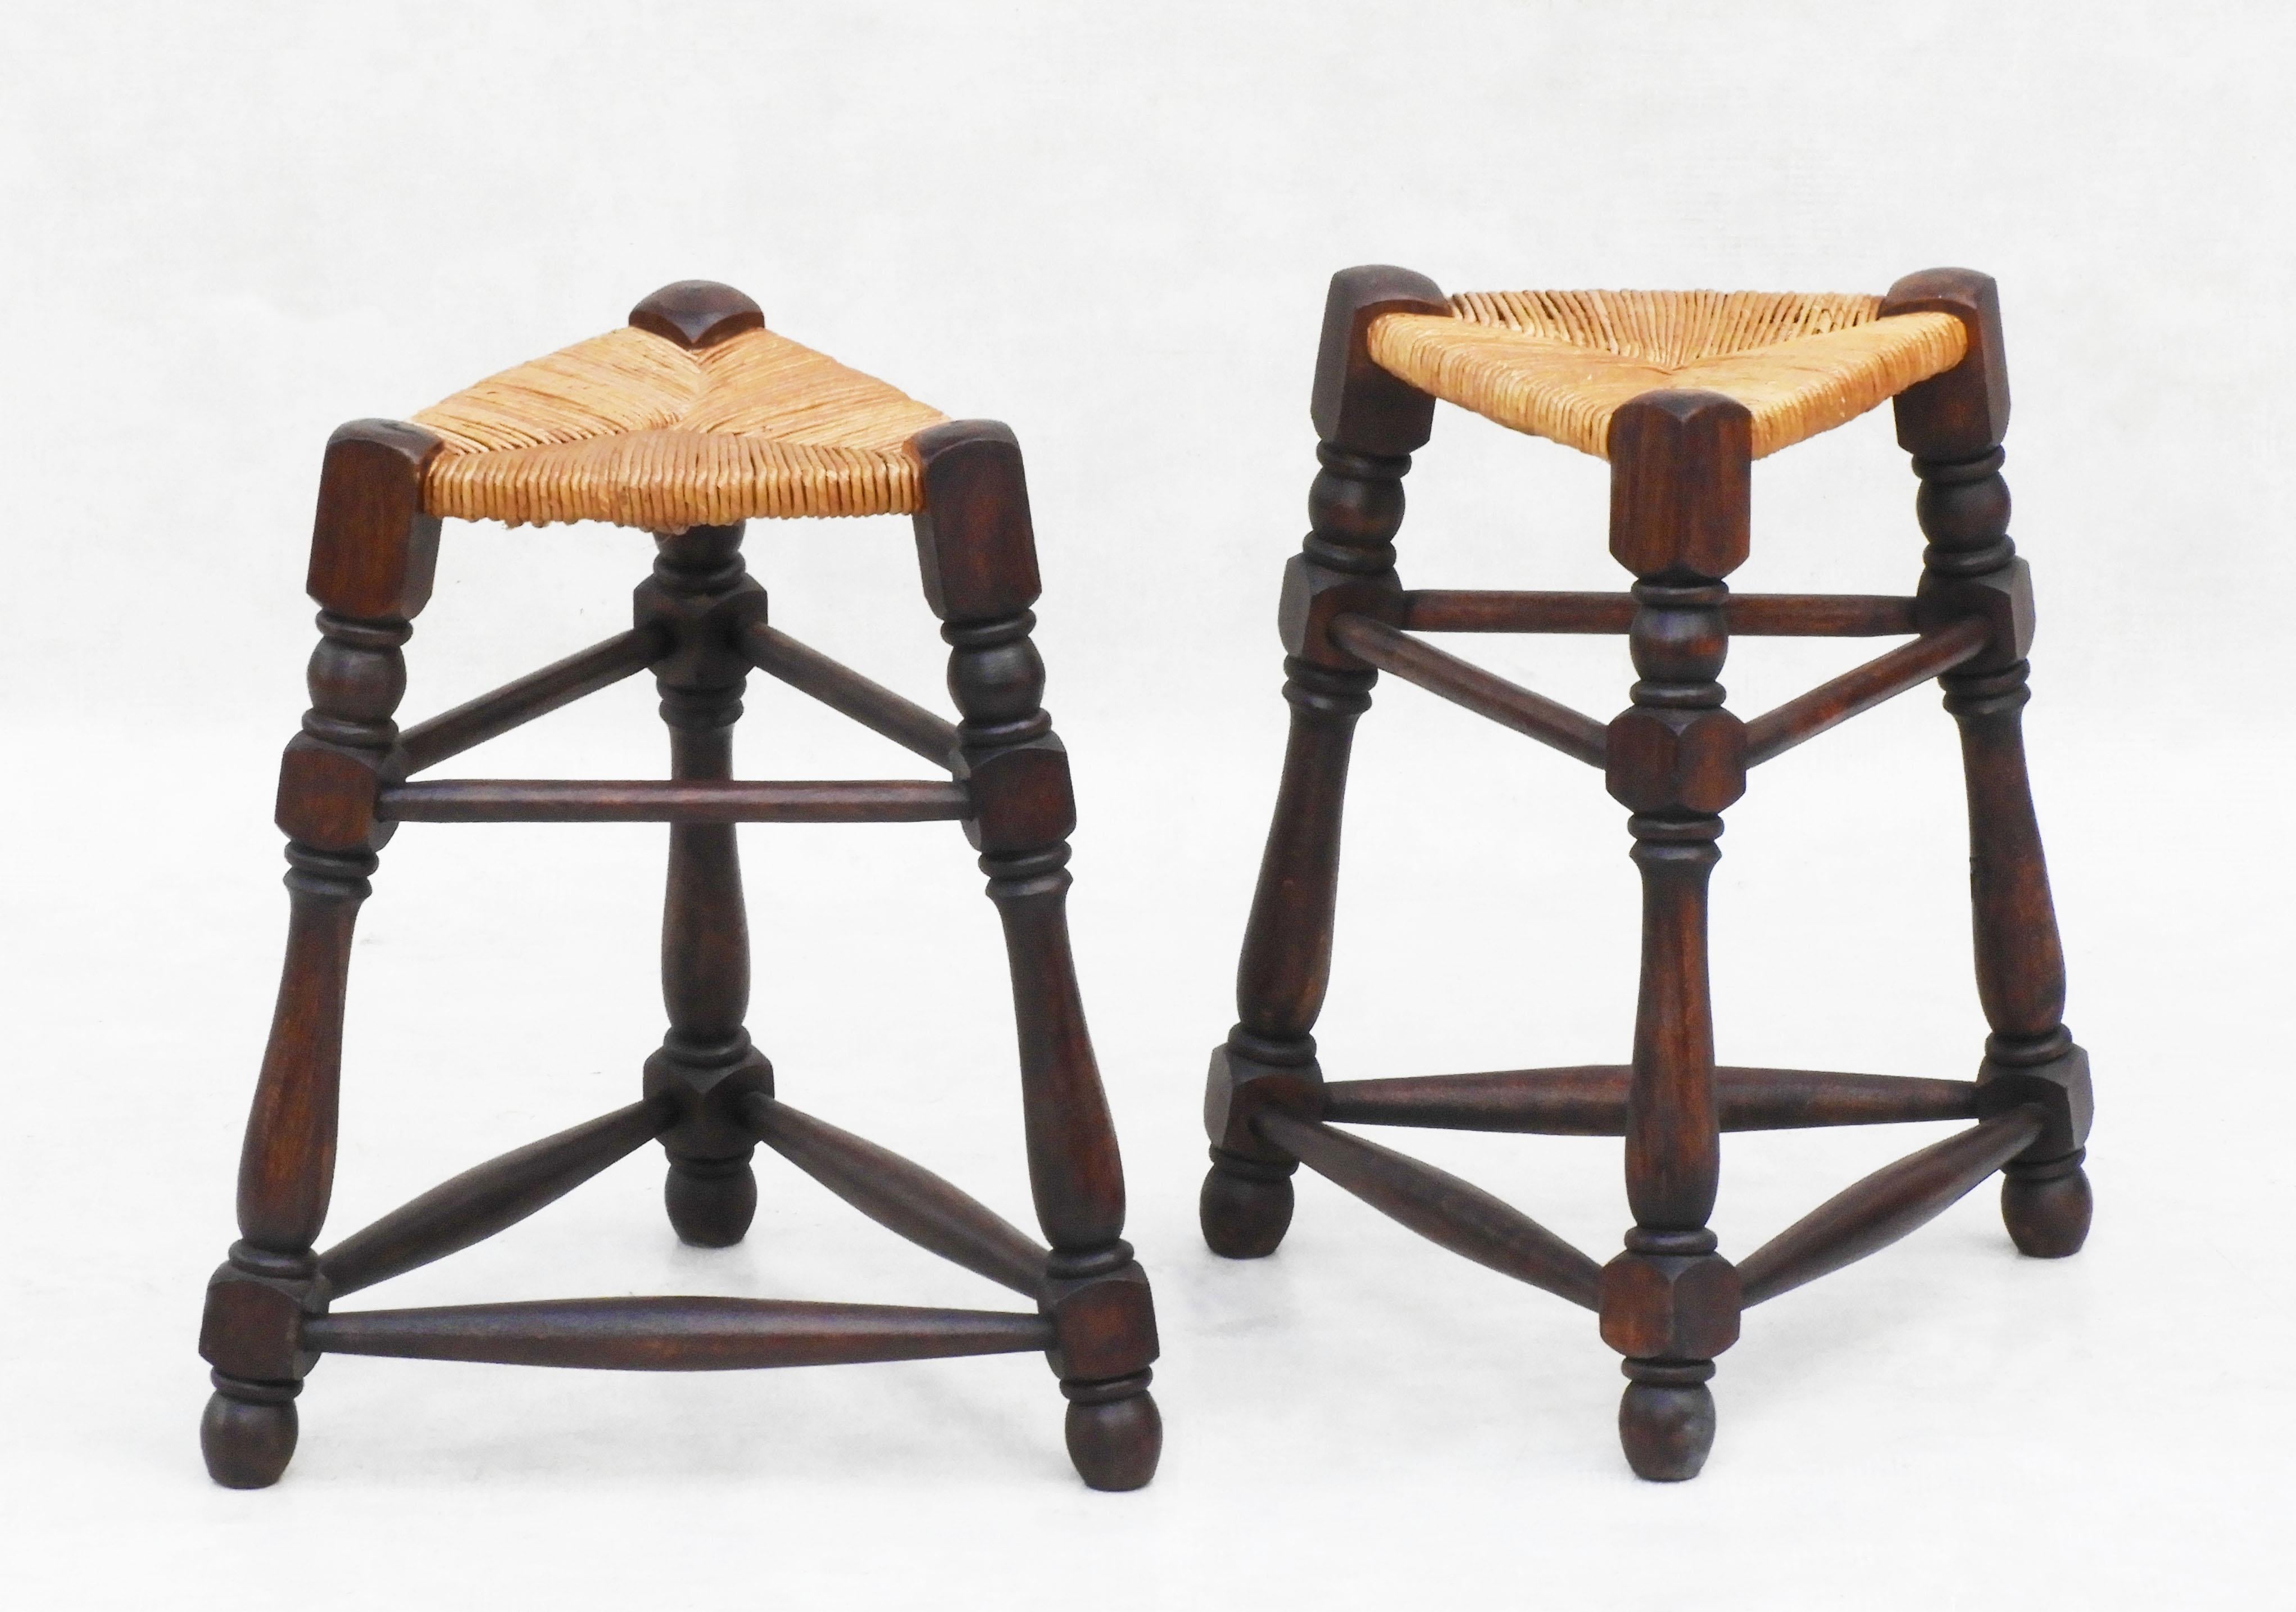 A good pair of Mid-Century French Provincial triangular 'tabouret' stools circa 1950. 
Hand-woven rush seat and on a turned wooden triangular frame. 
A quintessential classic of traditional French provincial design. 
In good original vintage